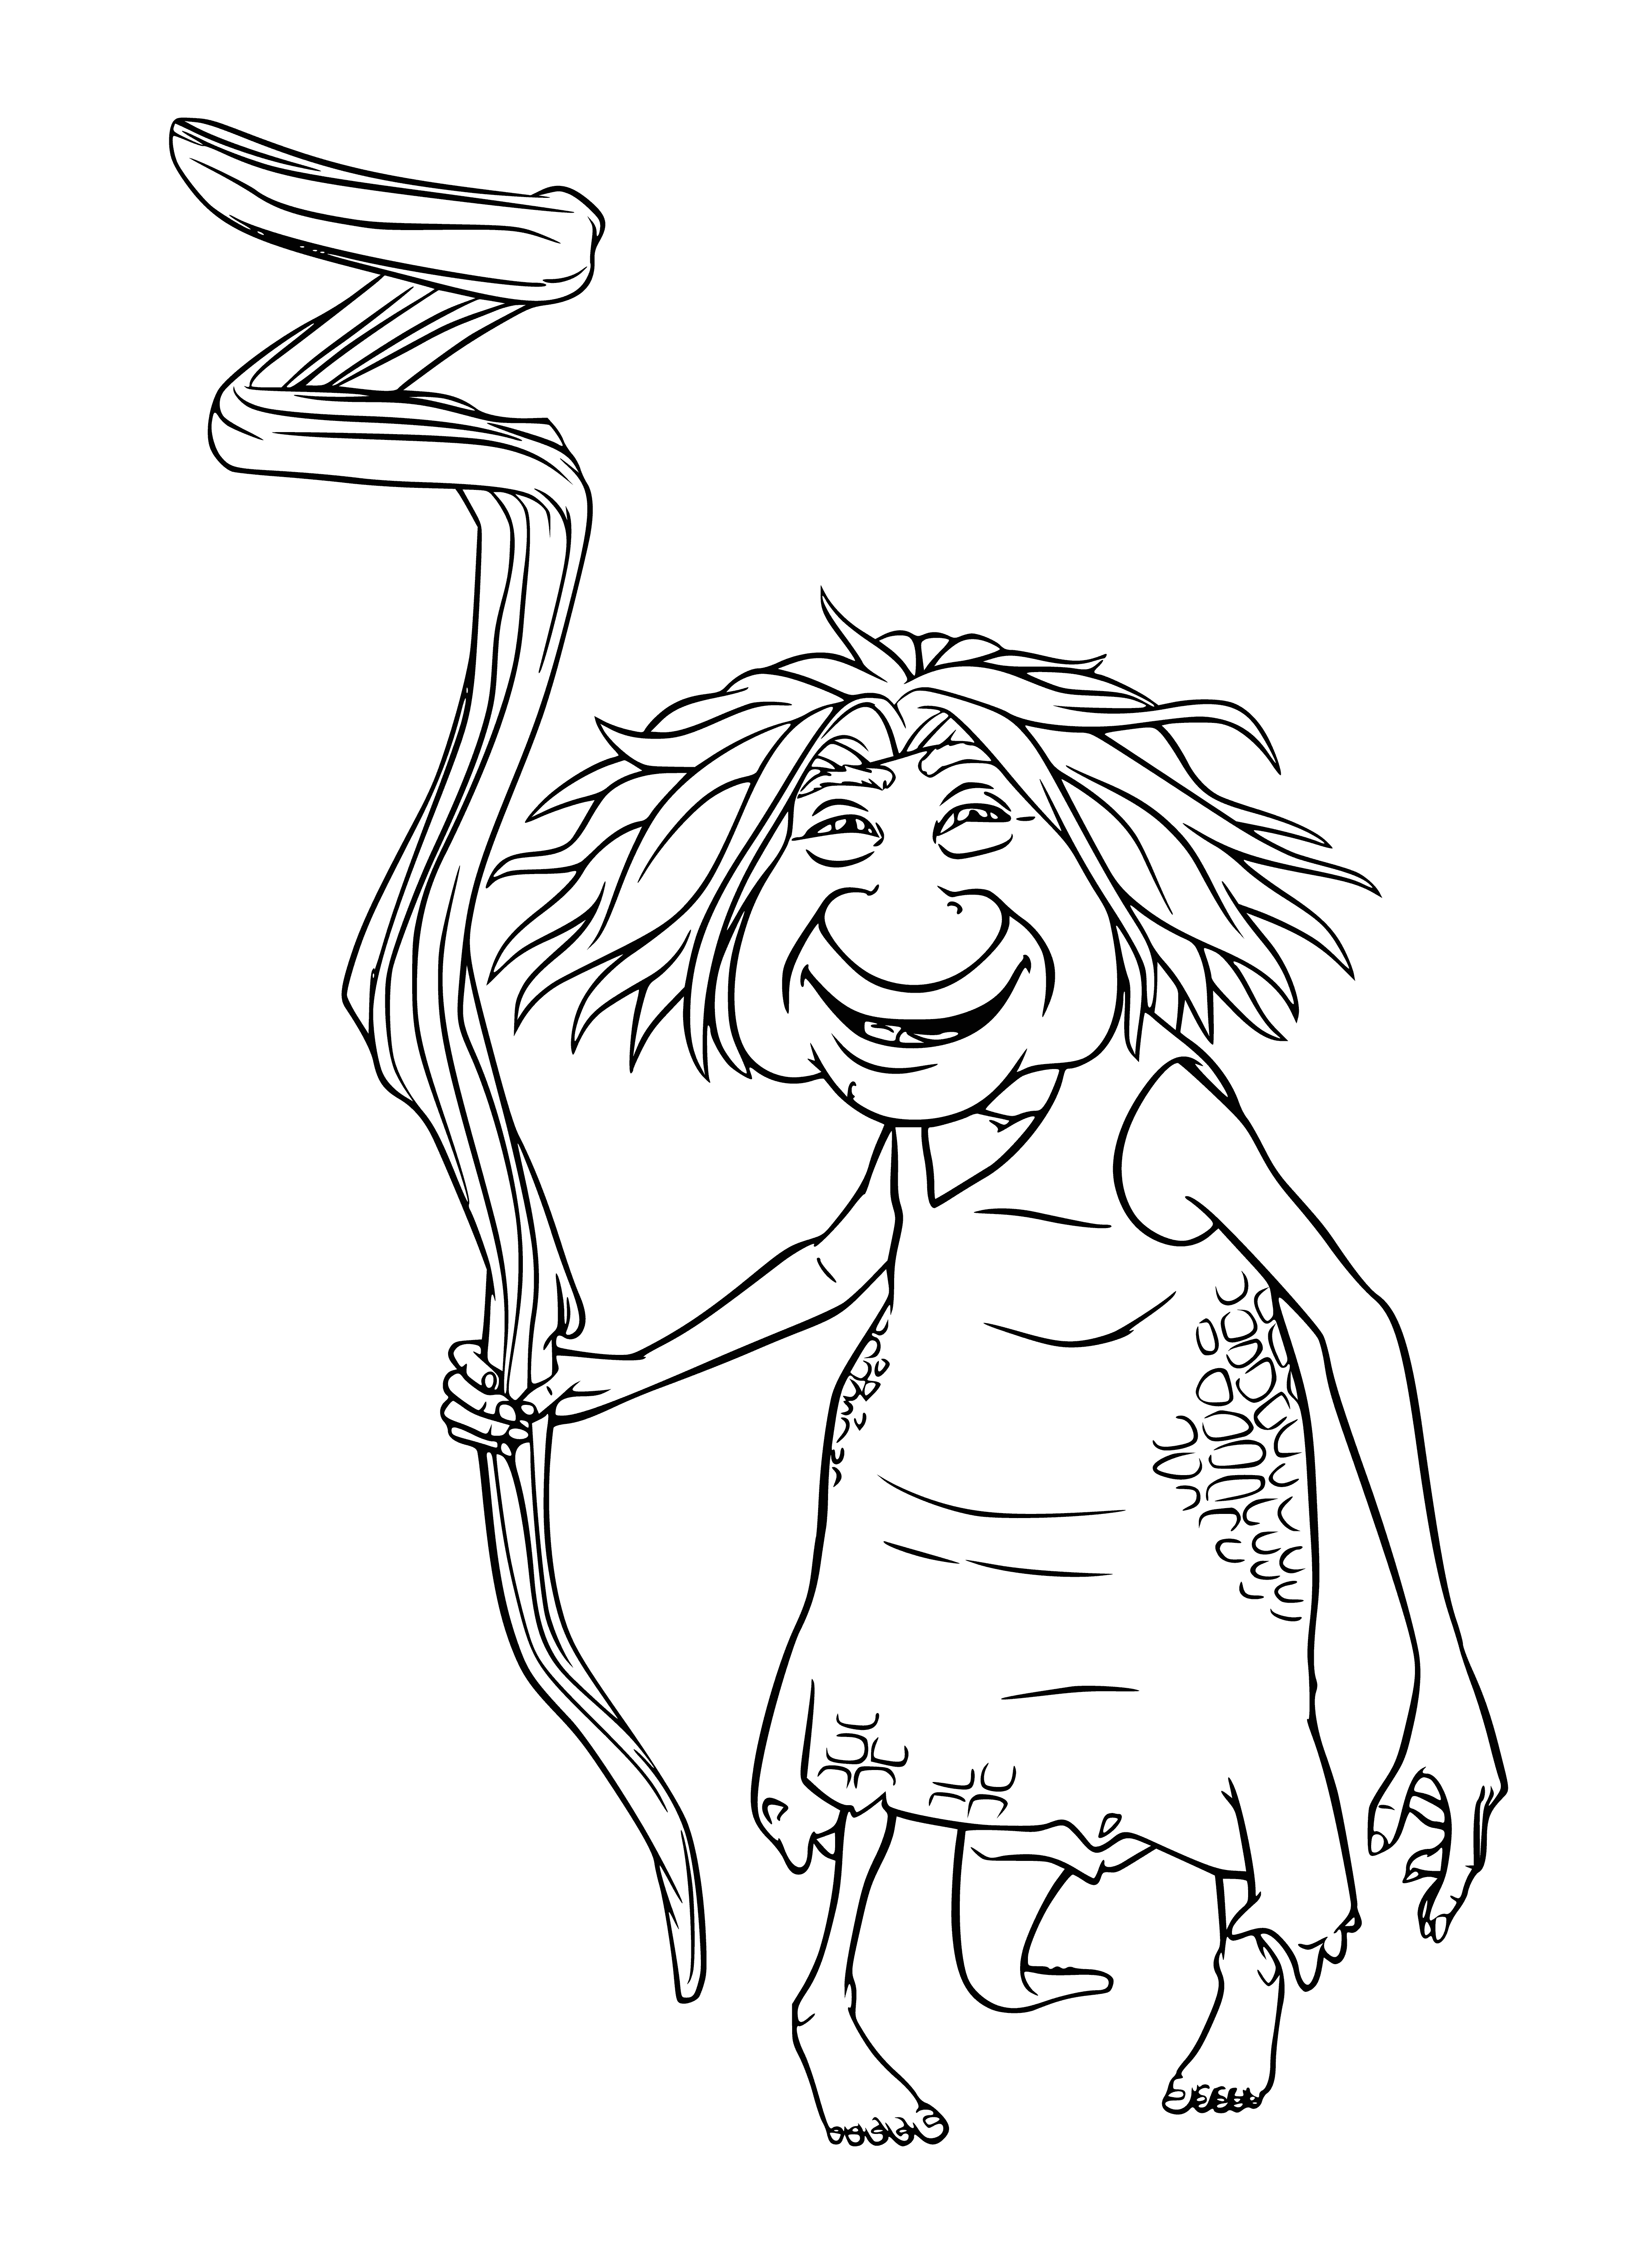 coloring page: Grandma Croods: wrinkly, toothless, bald, plump-nosed, and thin. Big smile despite her age.